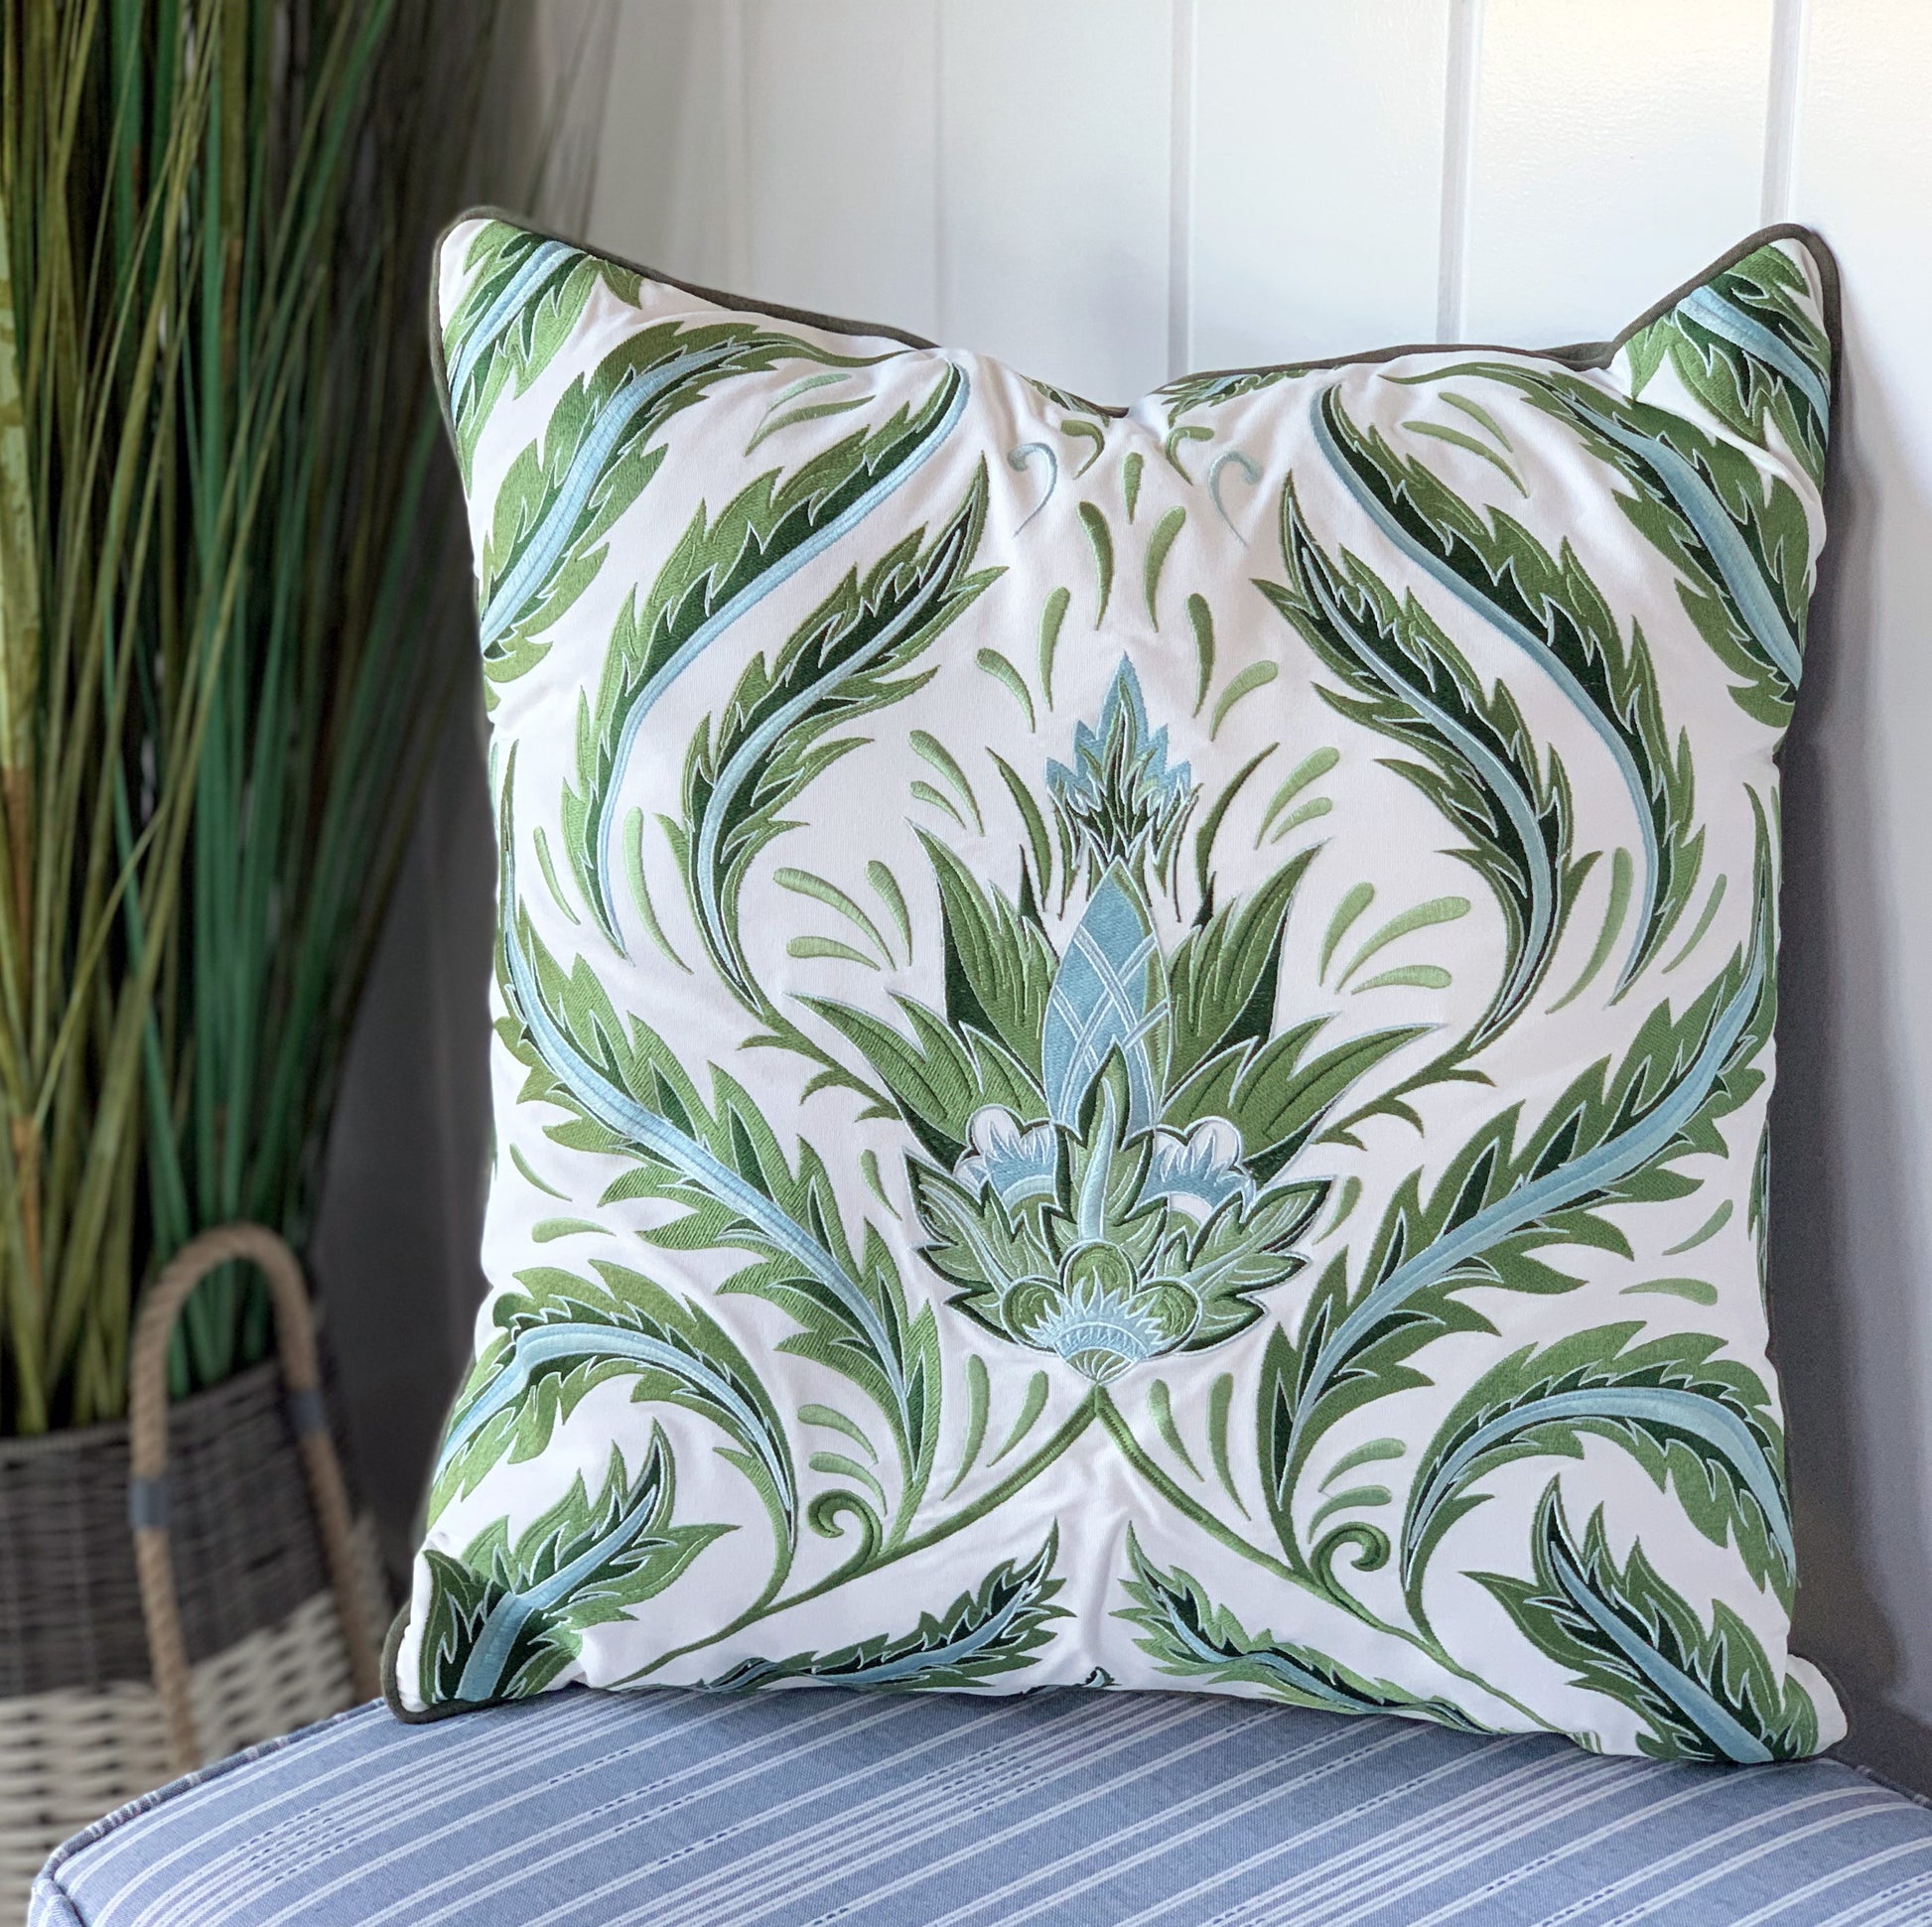 Green Morris Thistle pillow styled on a porch.